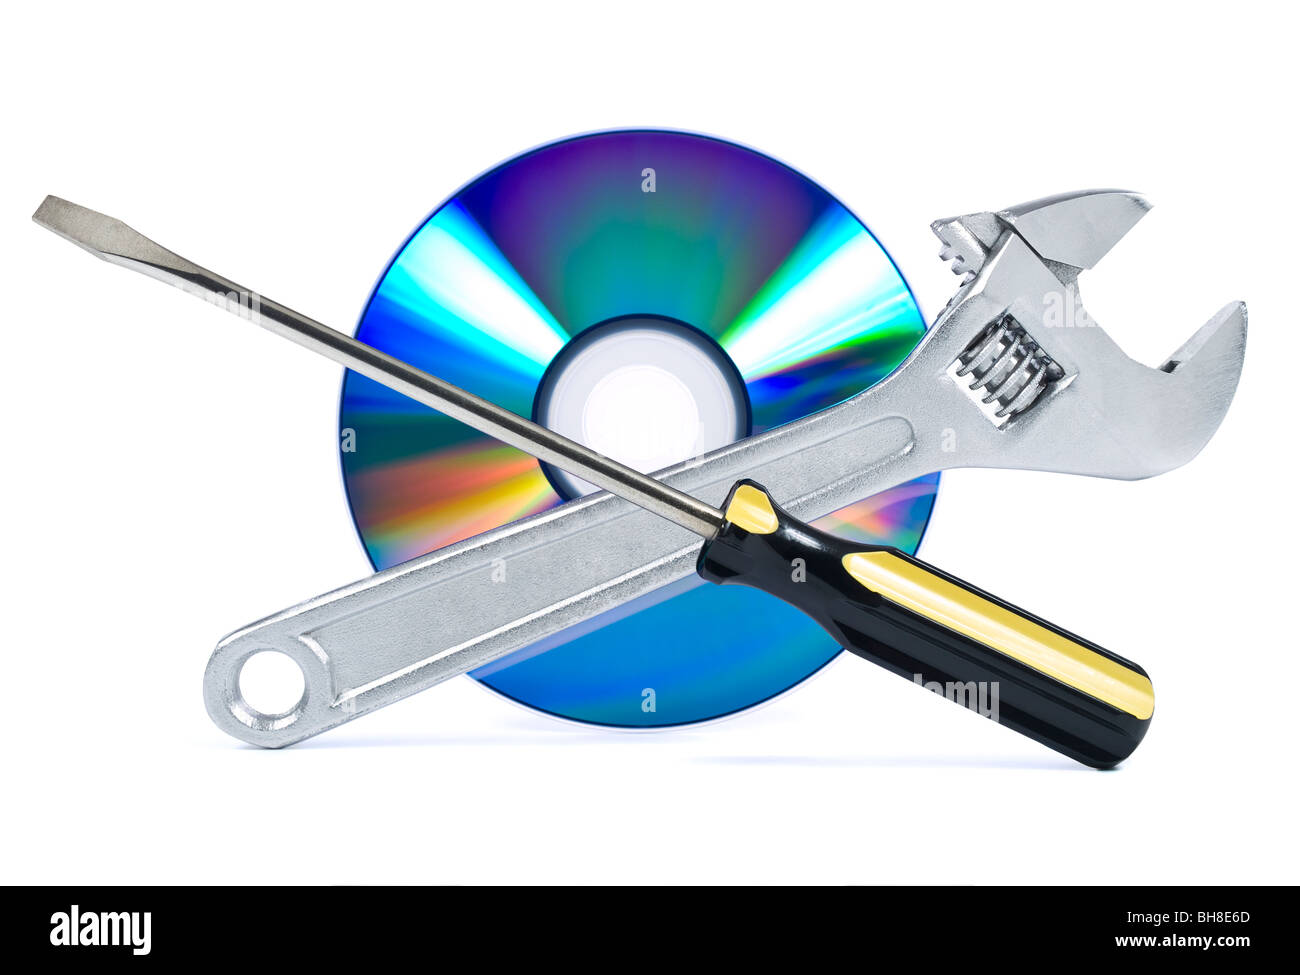 Technical support, fixing problems icon. A spanner, a screwdriver and a digital disc. Stock Photo